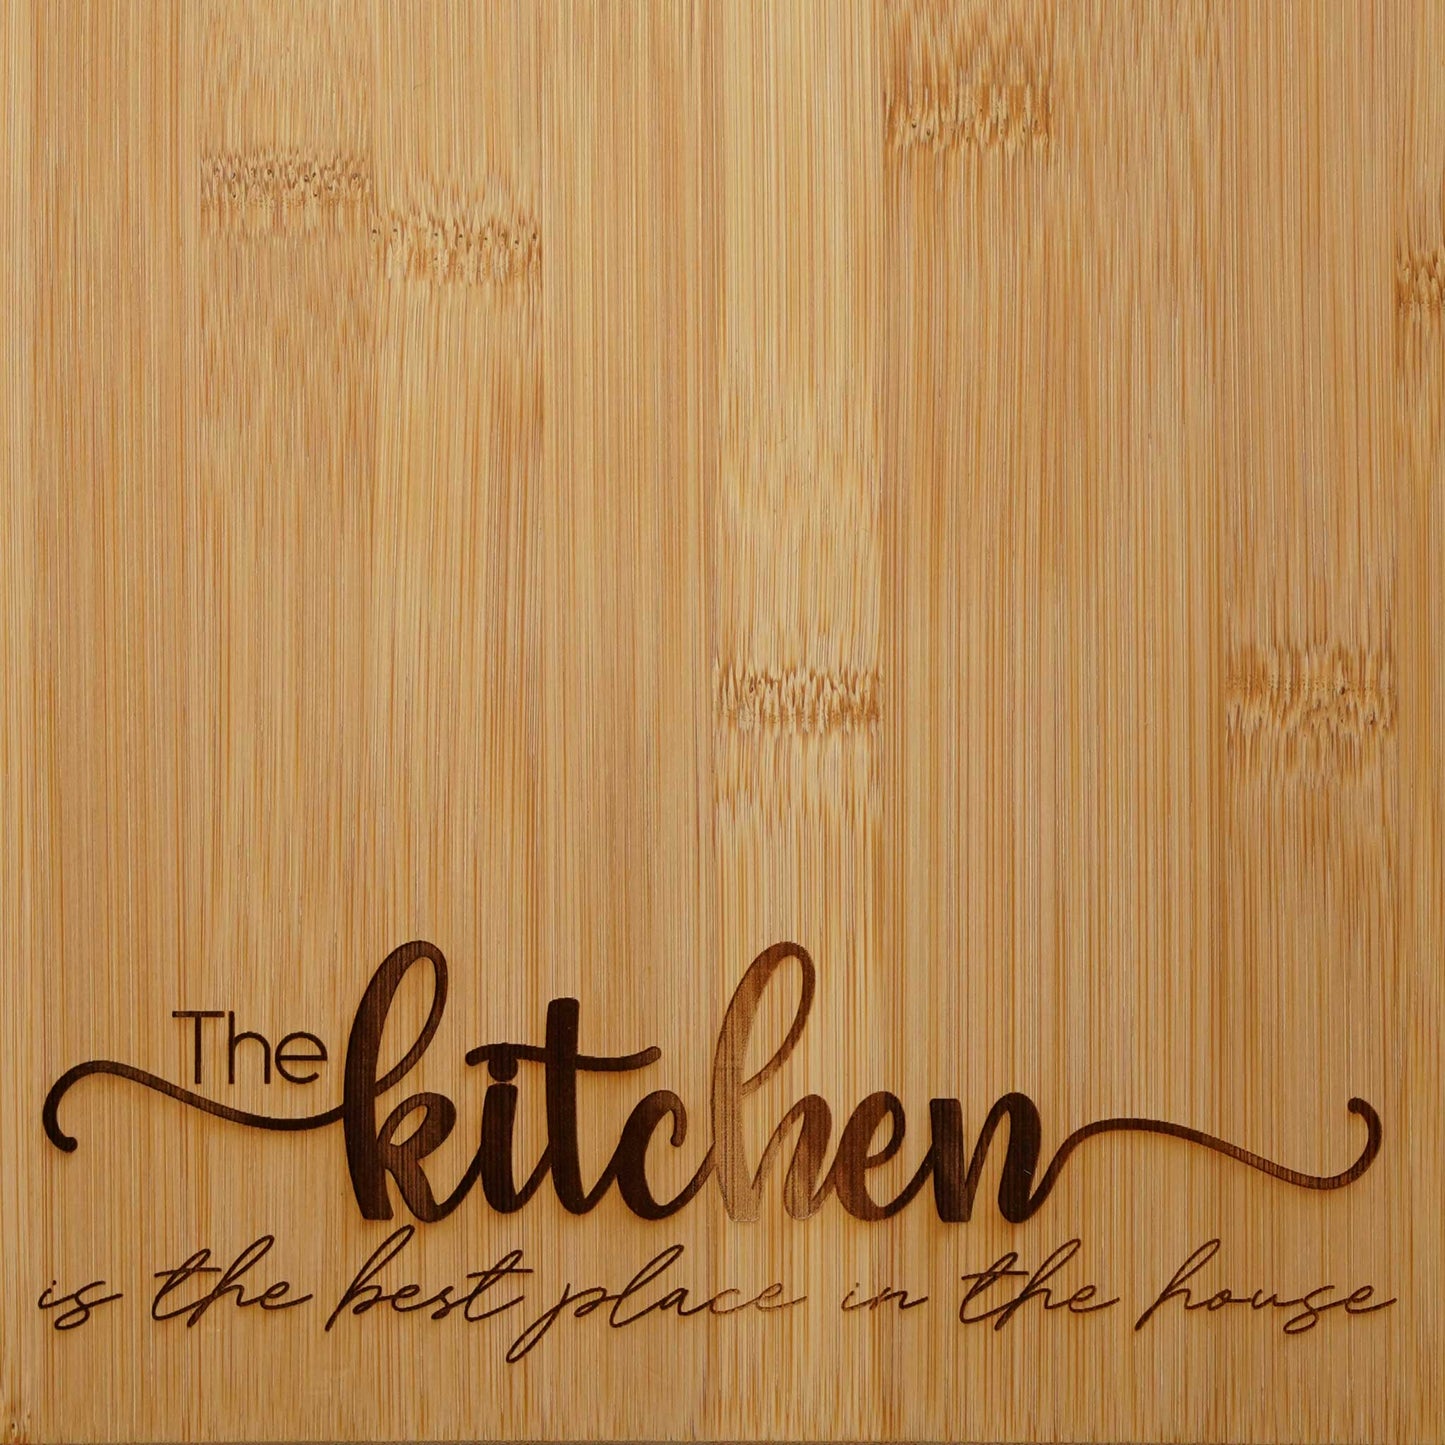 "The Kitchen" Engraved Solid Bamboo Cutting Board